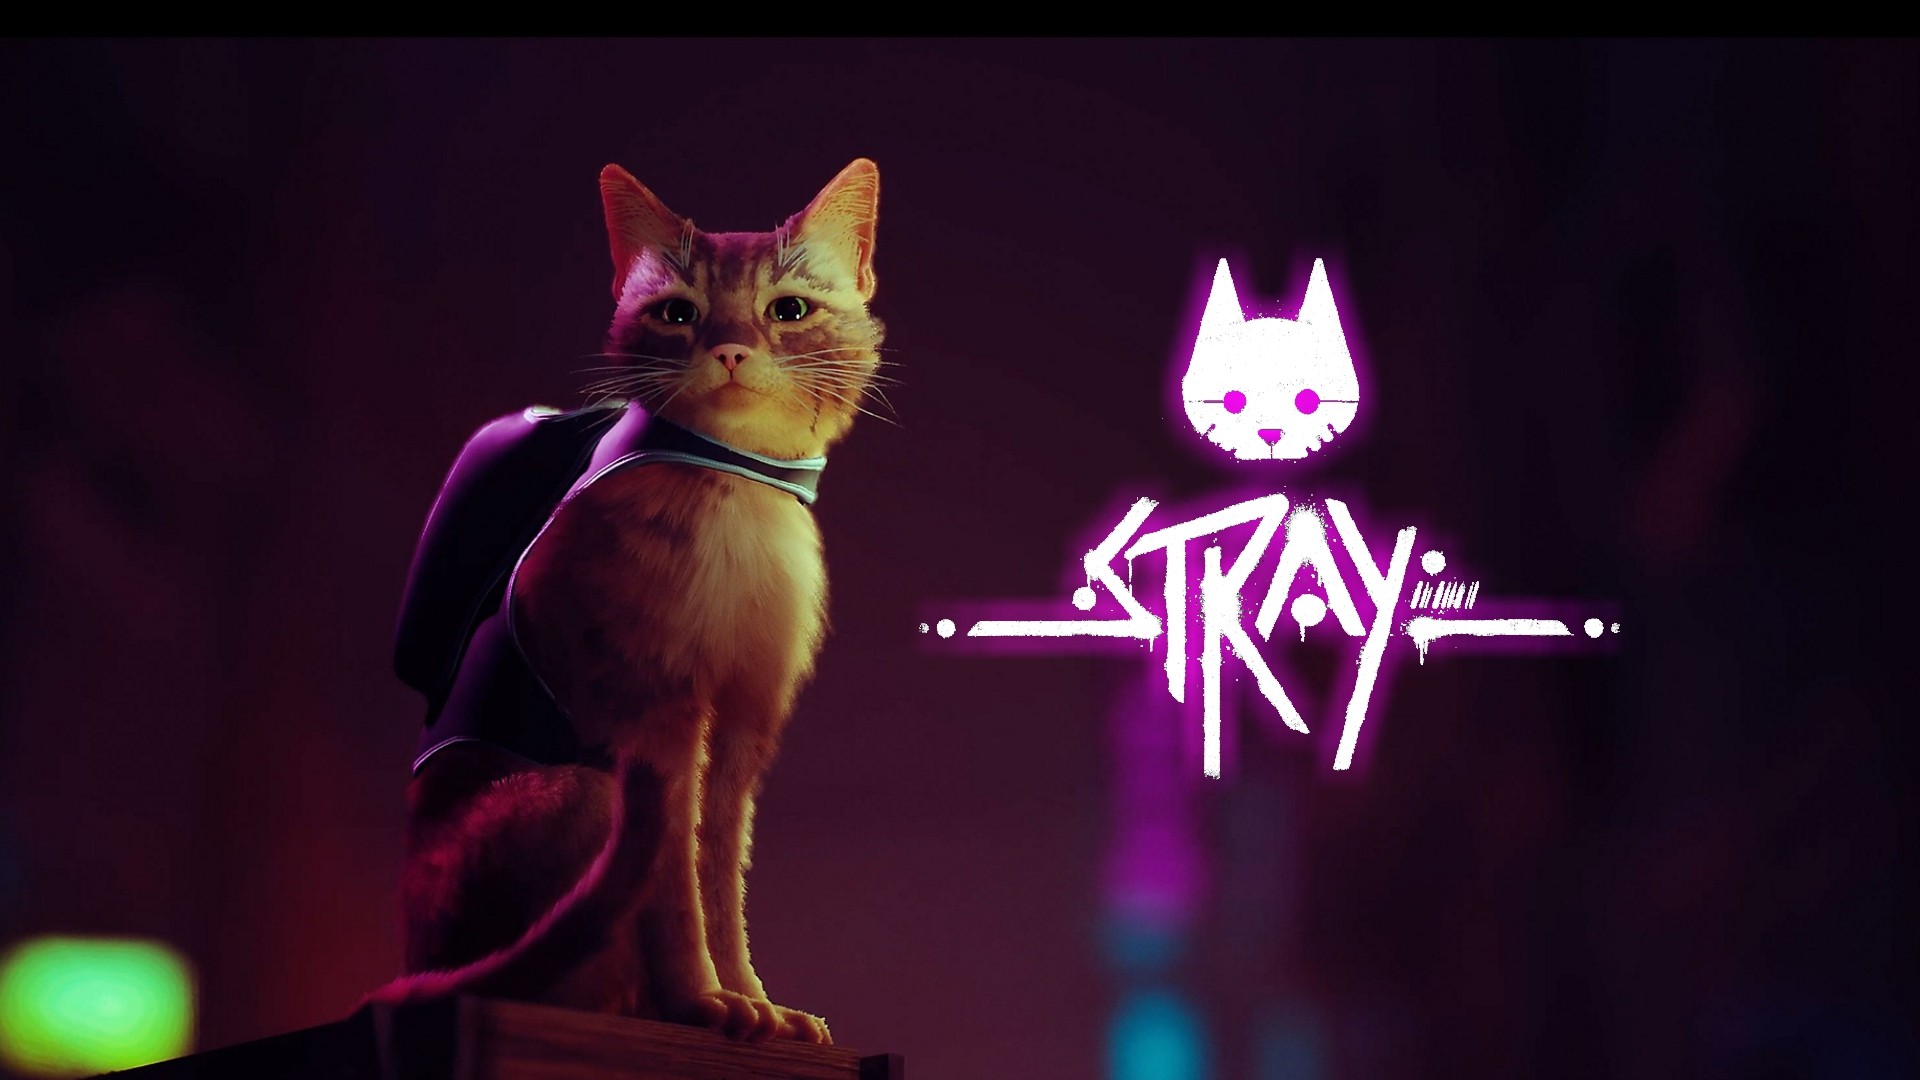 HOW TO DRAW STRAY LITTLE KITTY CAT GAME LOGO, CUTEST CAT GAME